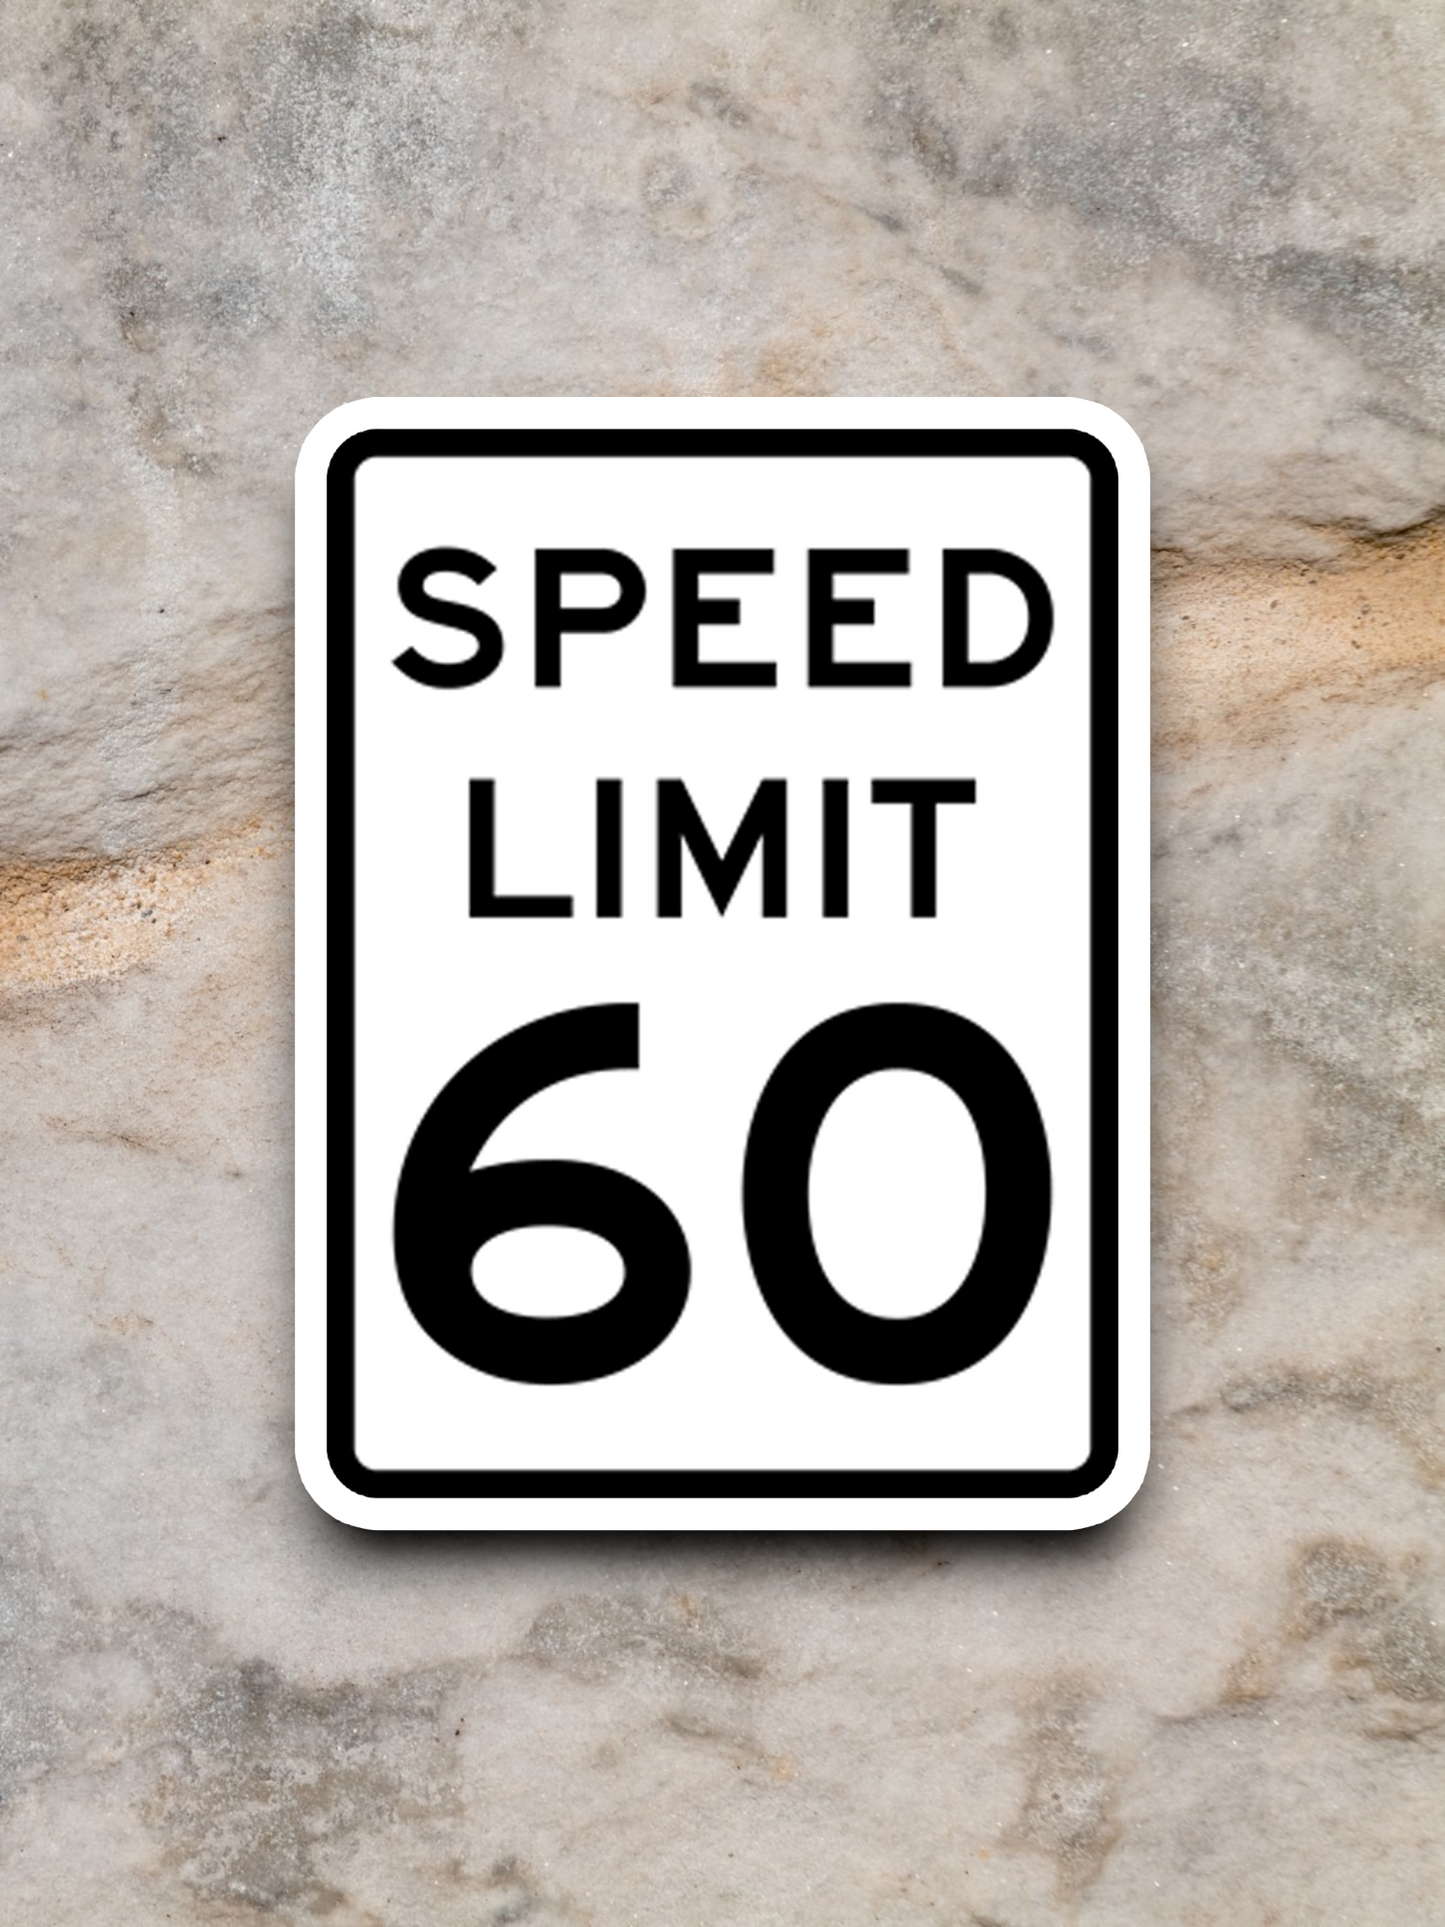 60 Miles Per Hour Speed Limit Road Sign Sticker